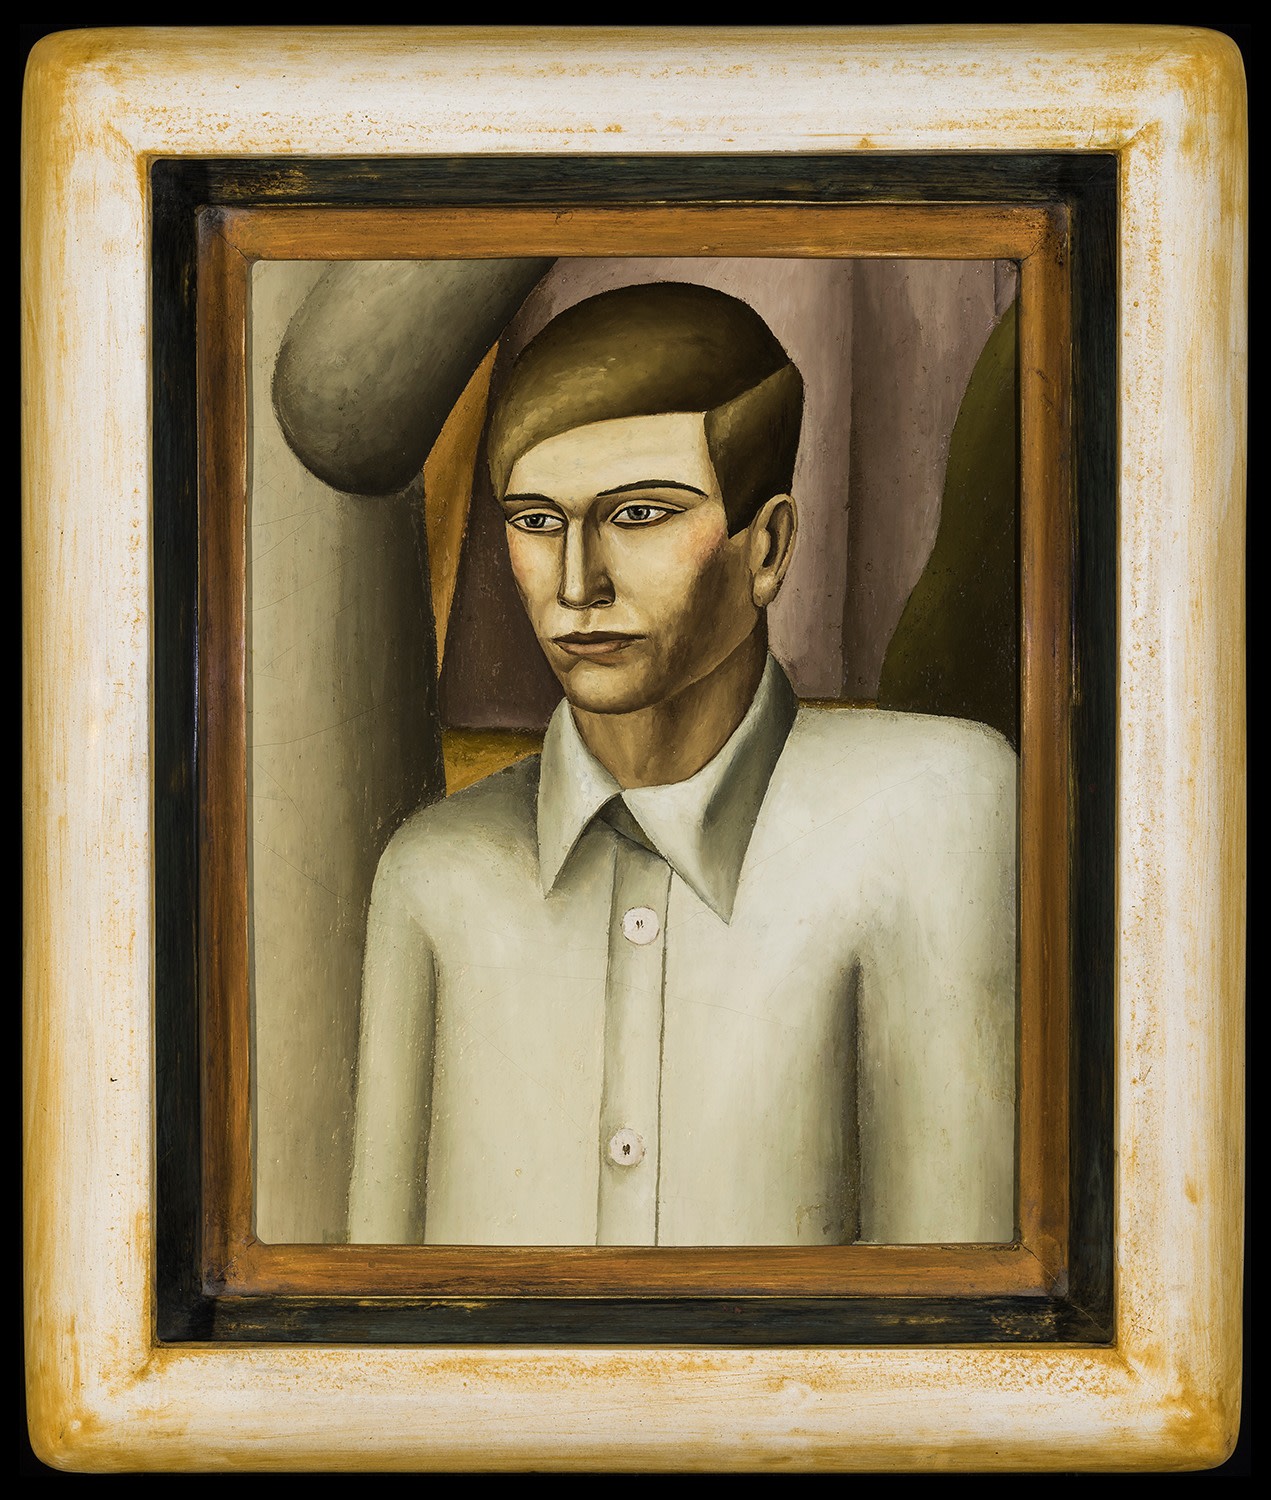 EVERETT GEE JACKSON (1900&ndash;1995), &quot;Self-Portrait,&quot; 1930. Oil on canvas, 11 1/2 x 9 in. Showing painted frame.